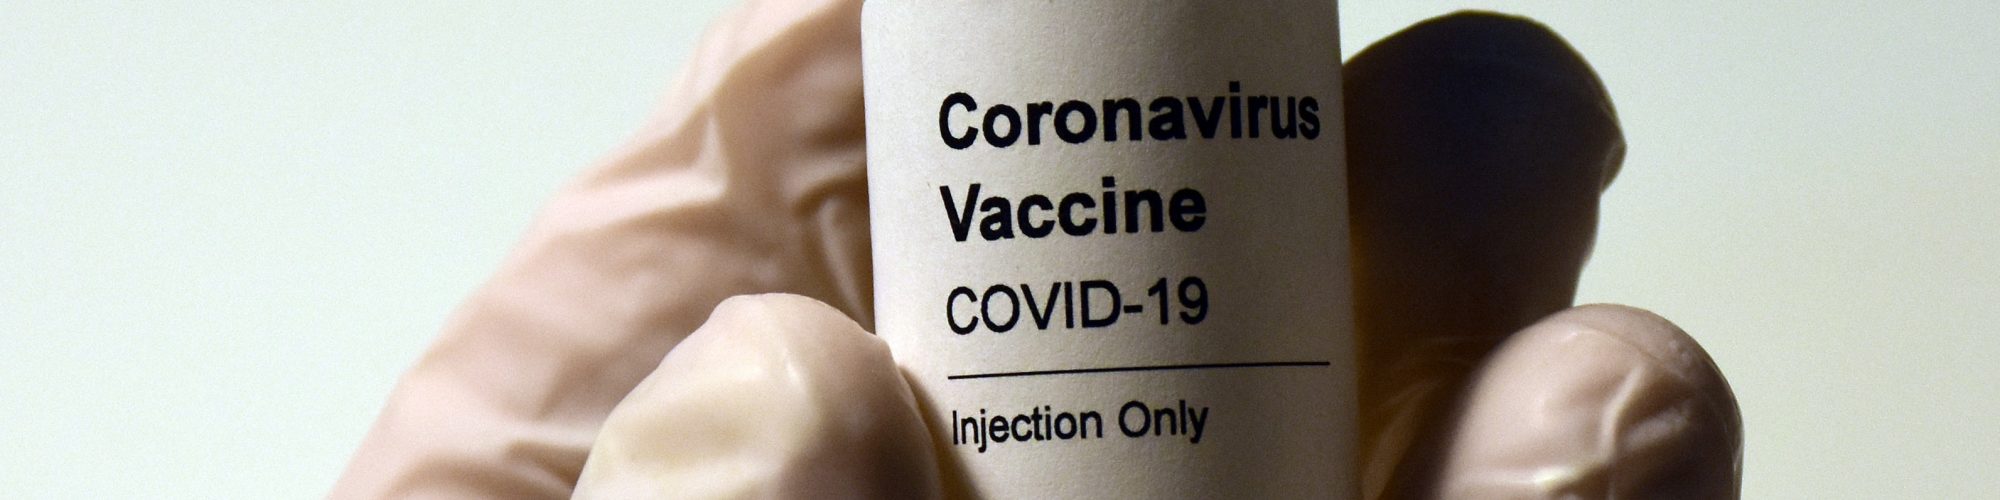 How to get vaccination consent from the public